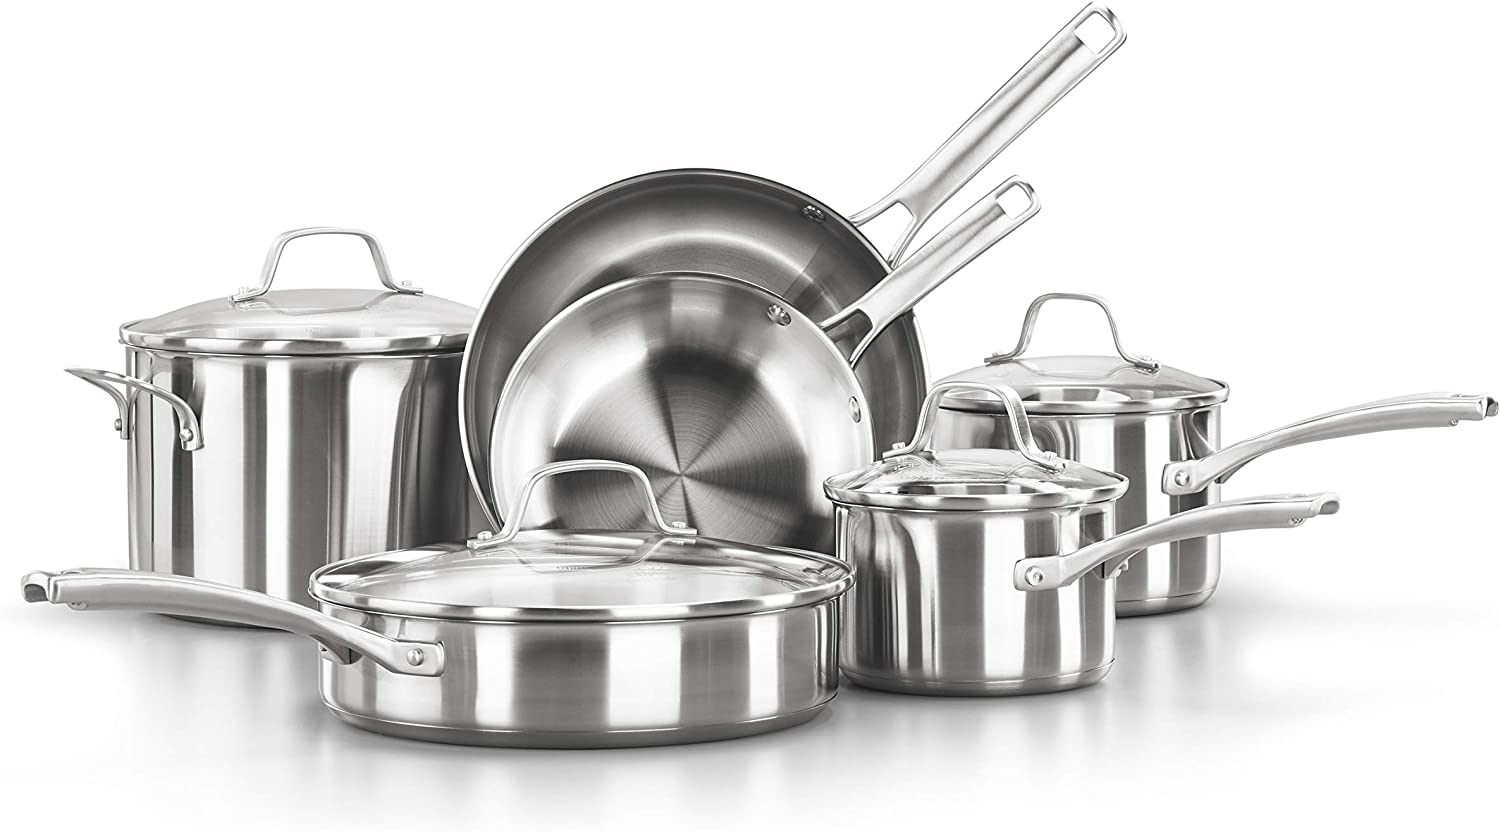 https://bigbigmart.com/wp-content/uploads/2023/06/Calphalon-10-Piece-Pots-and-Pans-Set-Stainless-Steel-Kitchen-Cookware-with-Stay-Cool-Handles-and-Pour-Spouts-Dishwasher-Safe-Silver.jpg